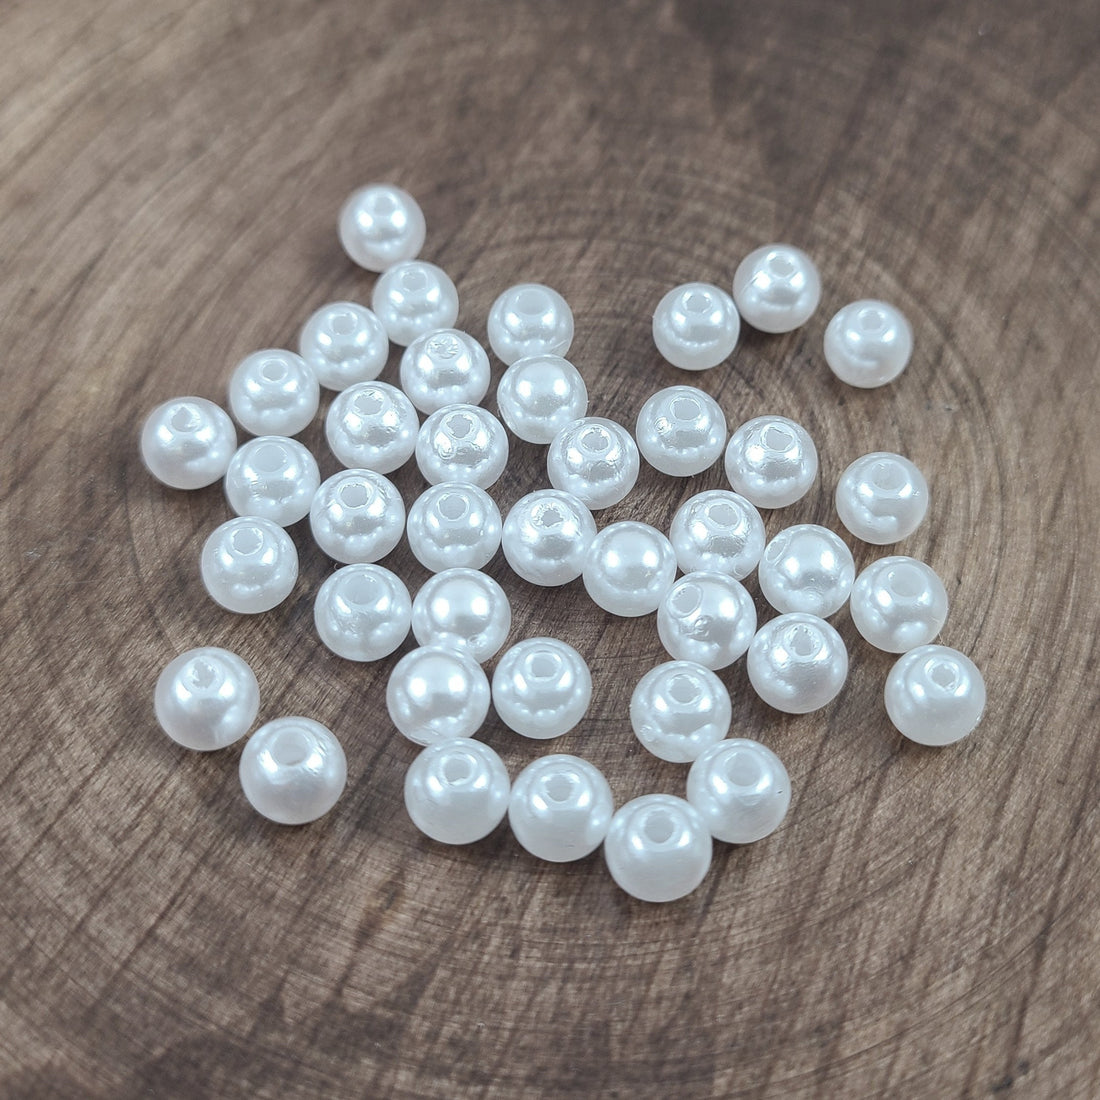 40 pearl spacer beads, 6mm plastic beads for jewelry making, White round beads